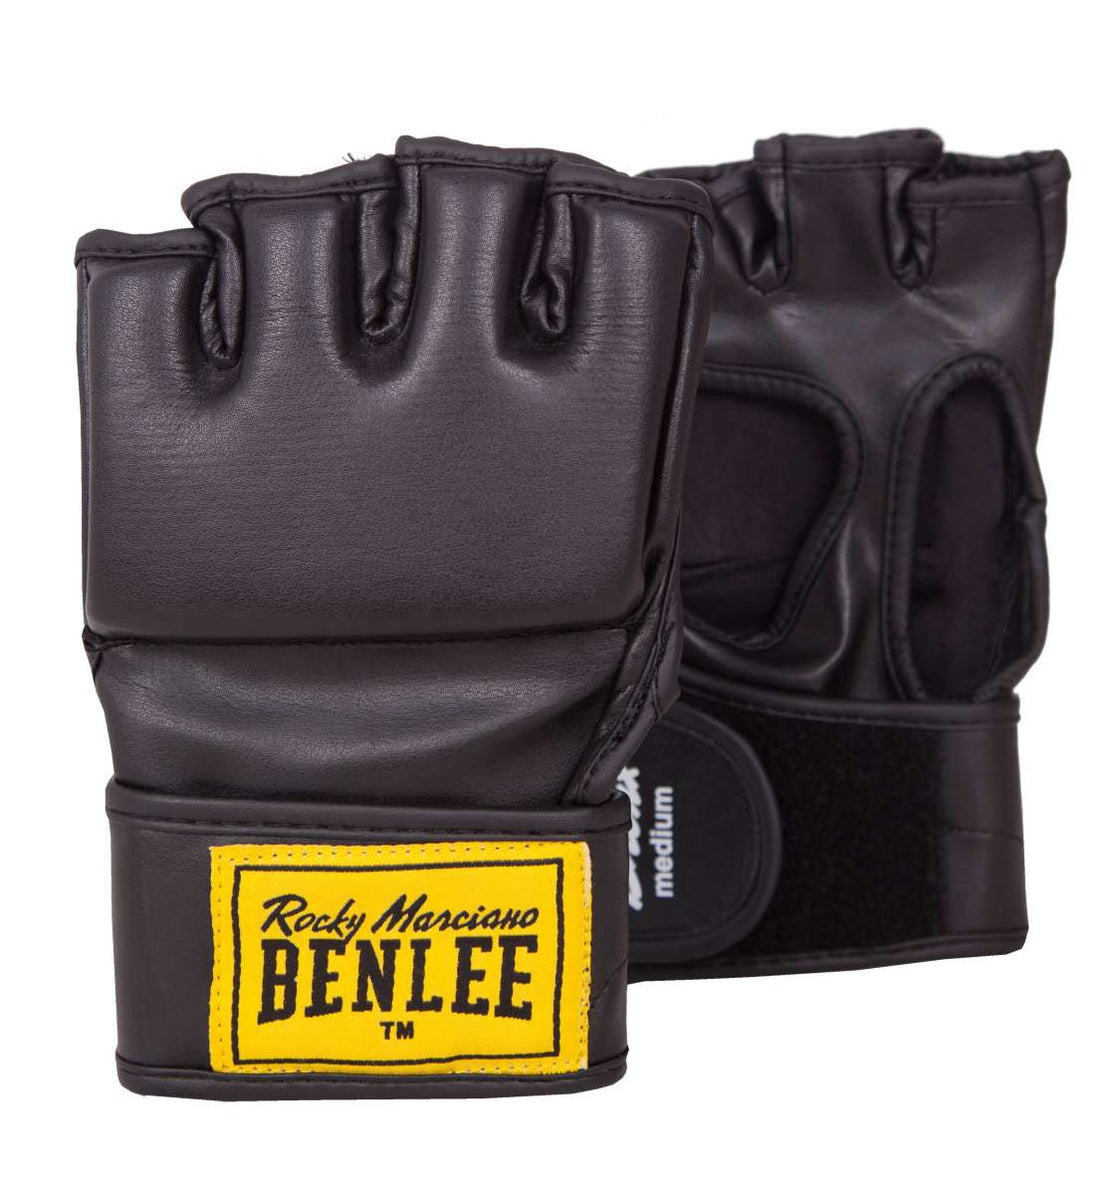 Benlee MMA Handschuhe "Bronx" no-limit-fitness-and-fight-shop.myshopify.com